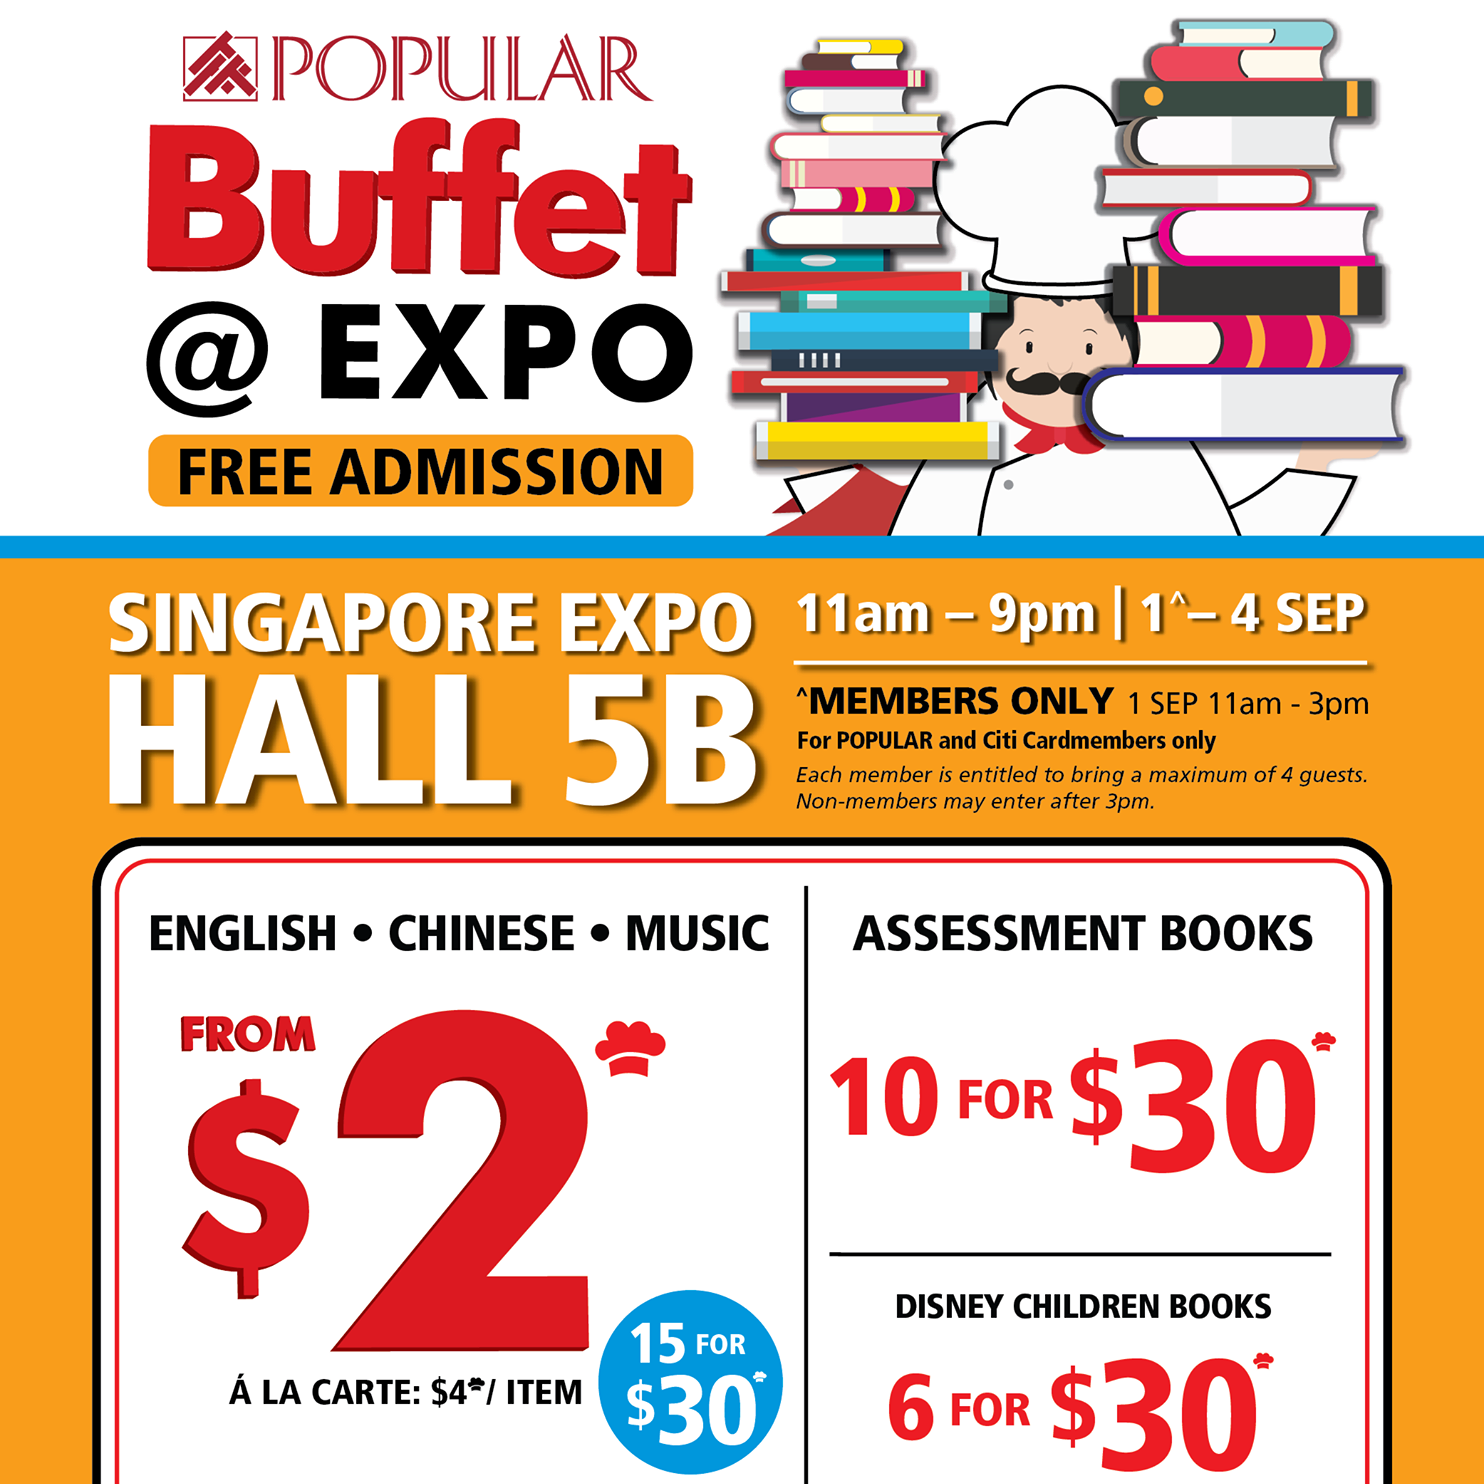 Popular Singapore Buffet at Singapore EXPO Hall 5B Promotion 1 to 4 Sep 2016